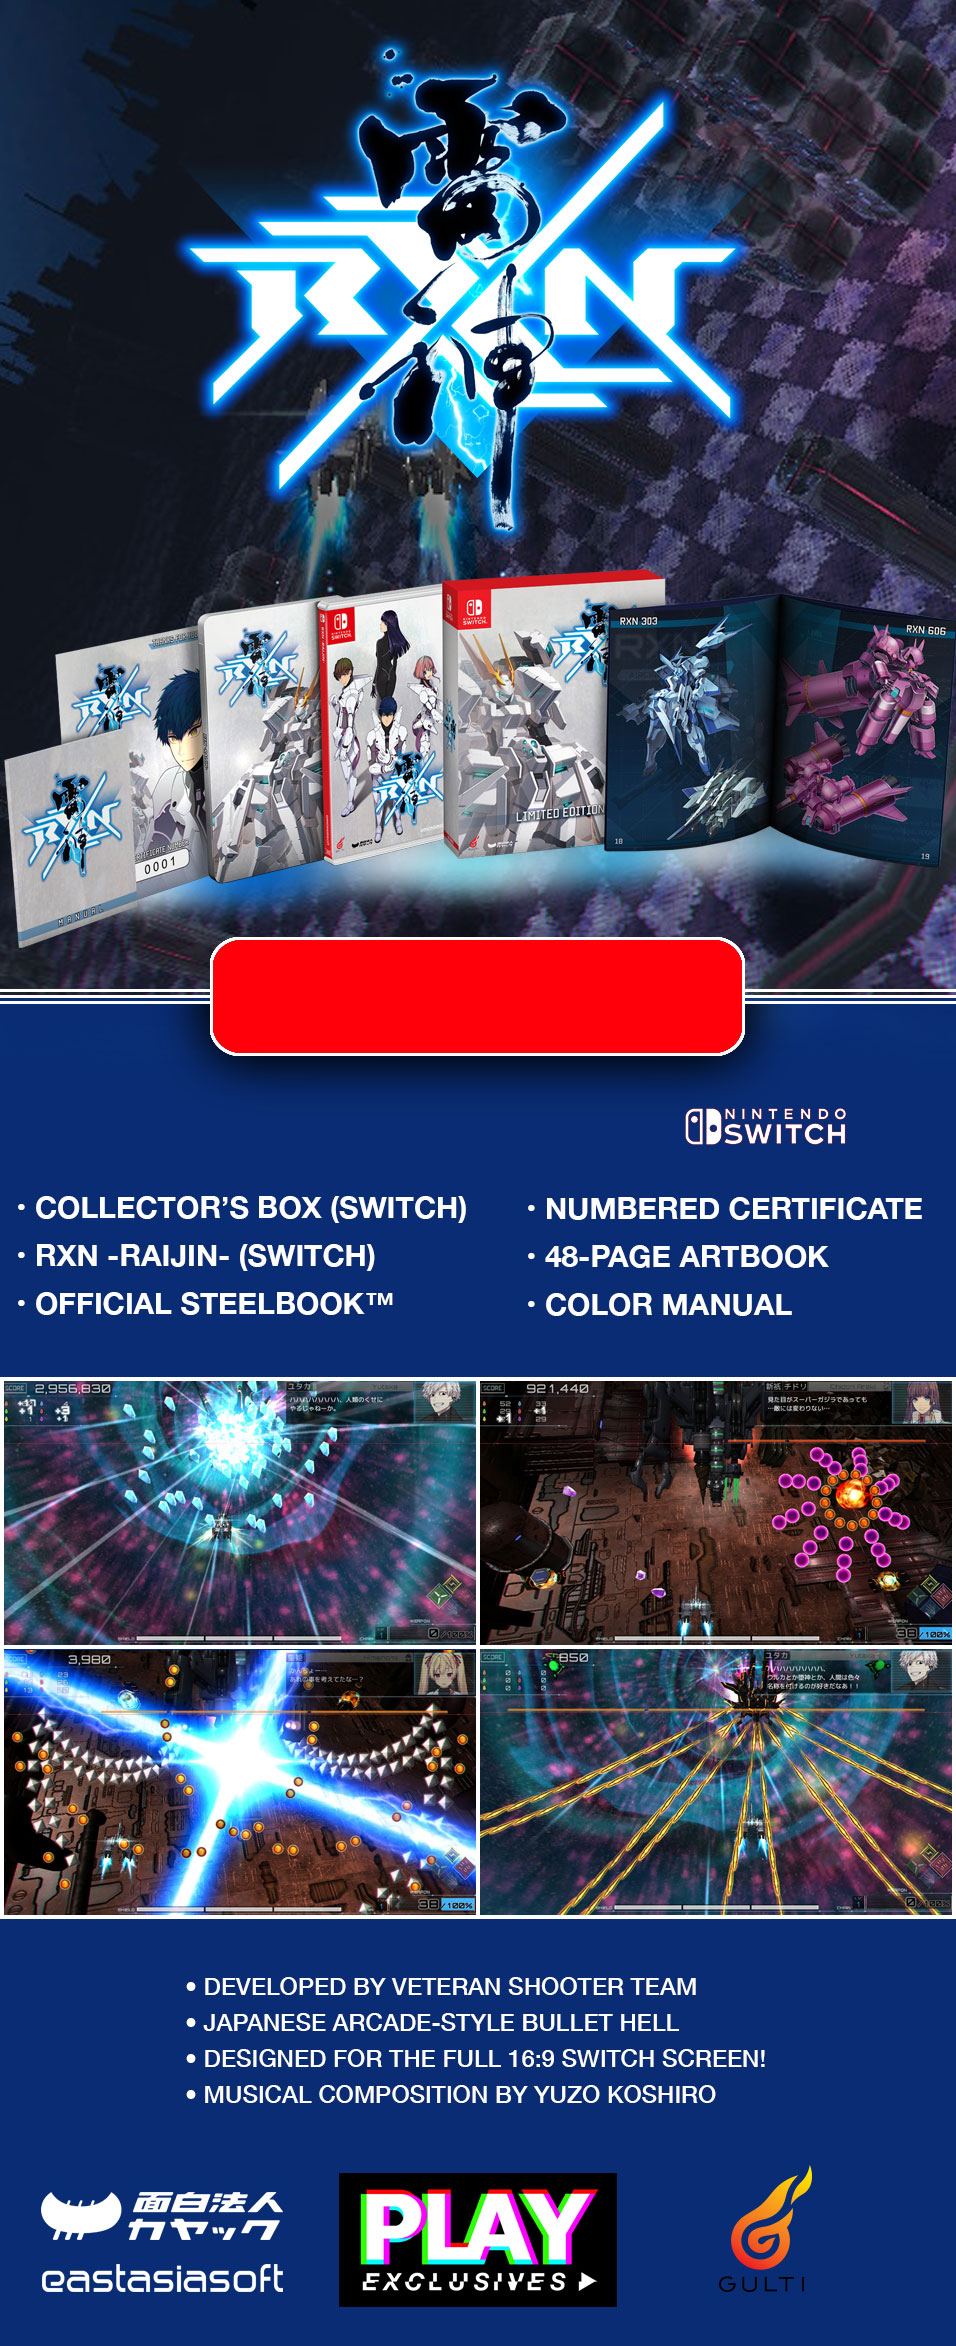 PLAY Exclusives - RXN RAIJIN Physical Limited Edition